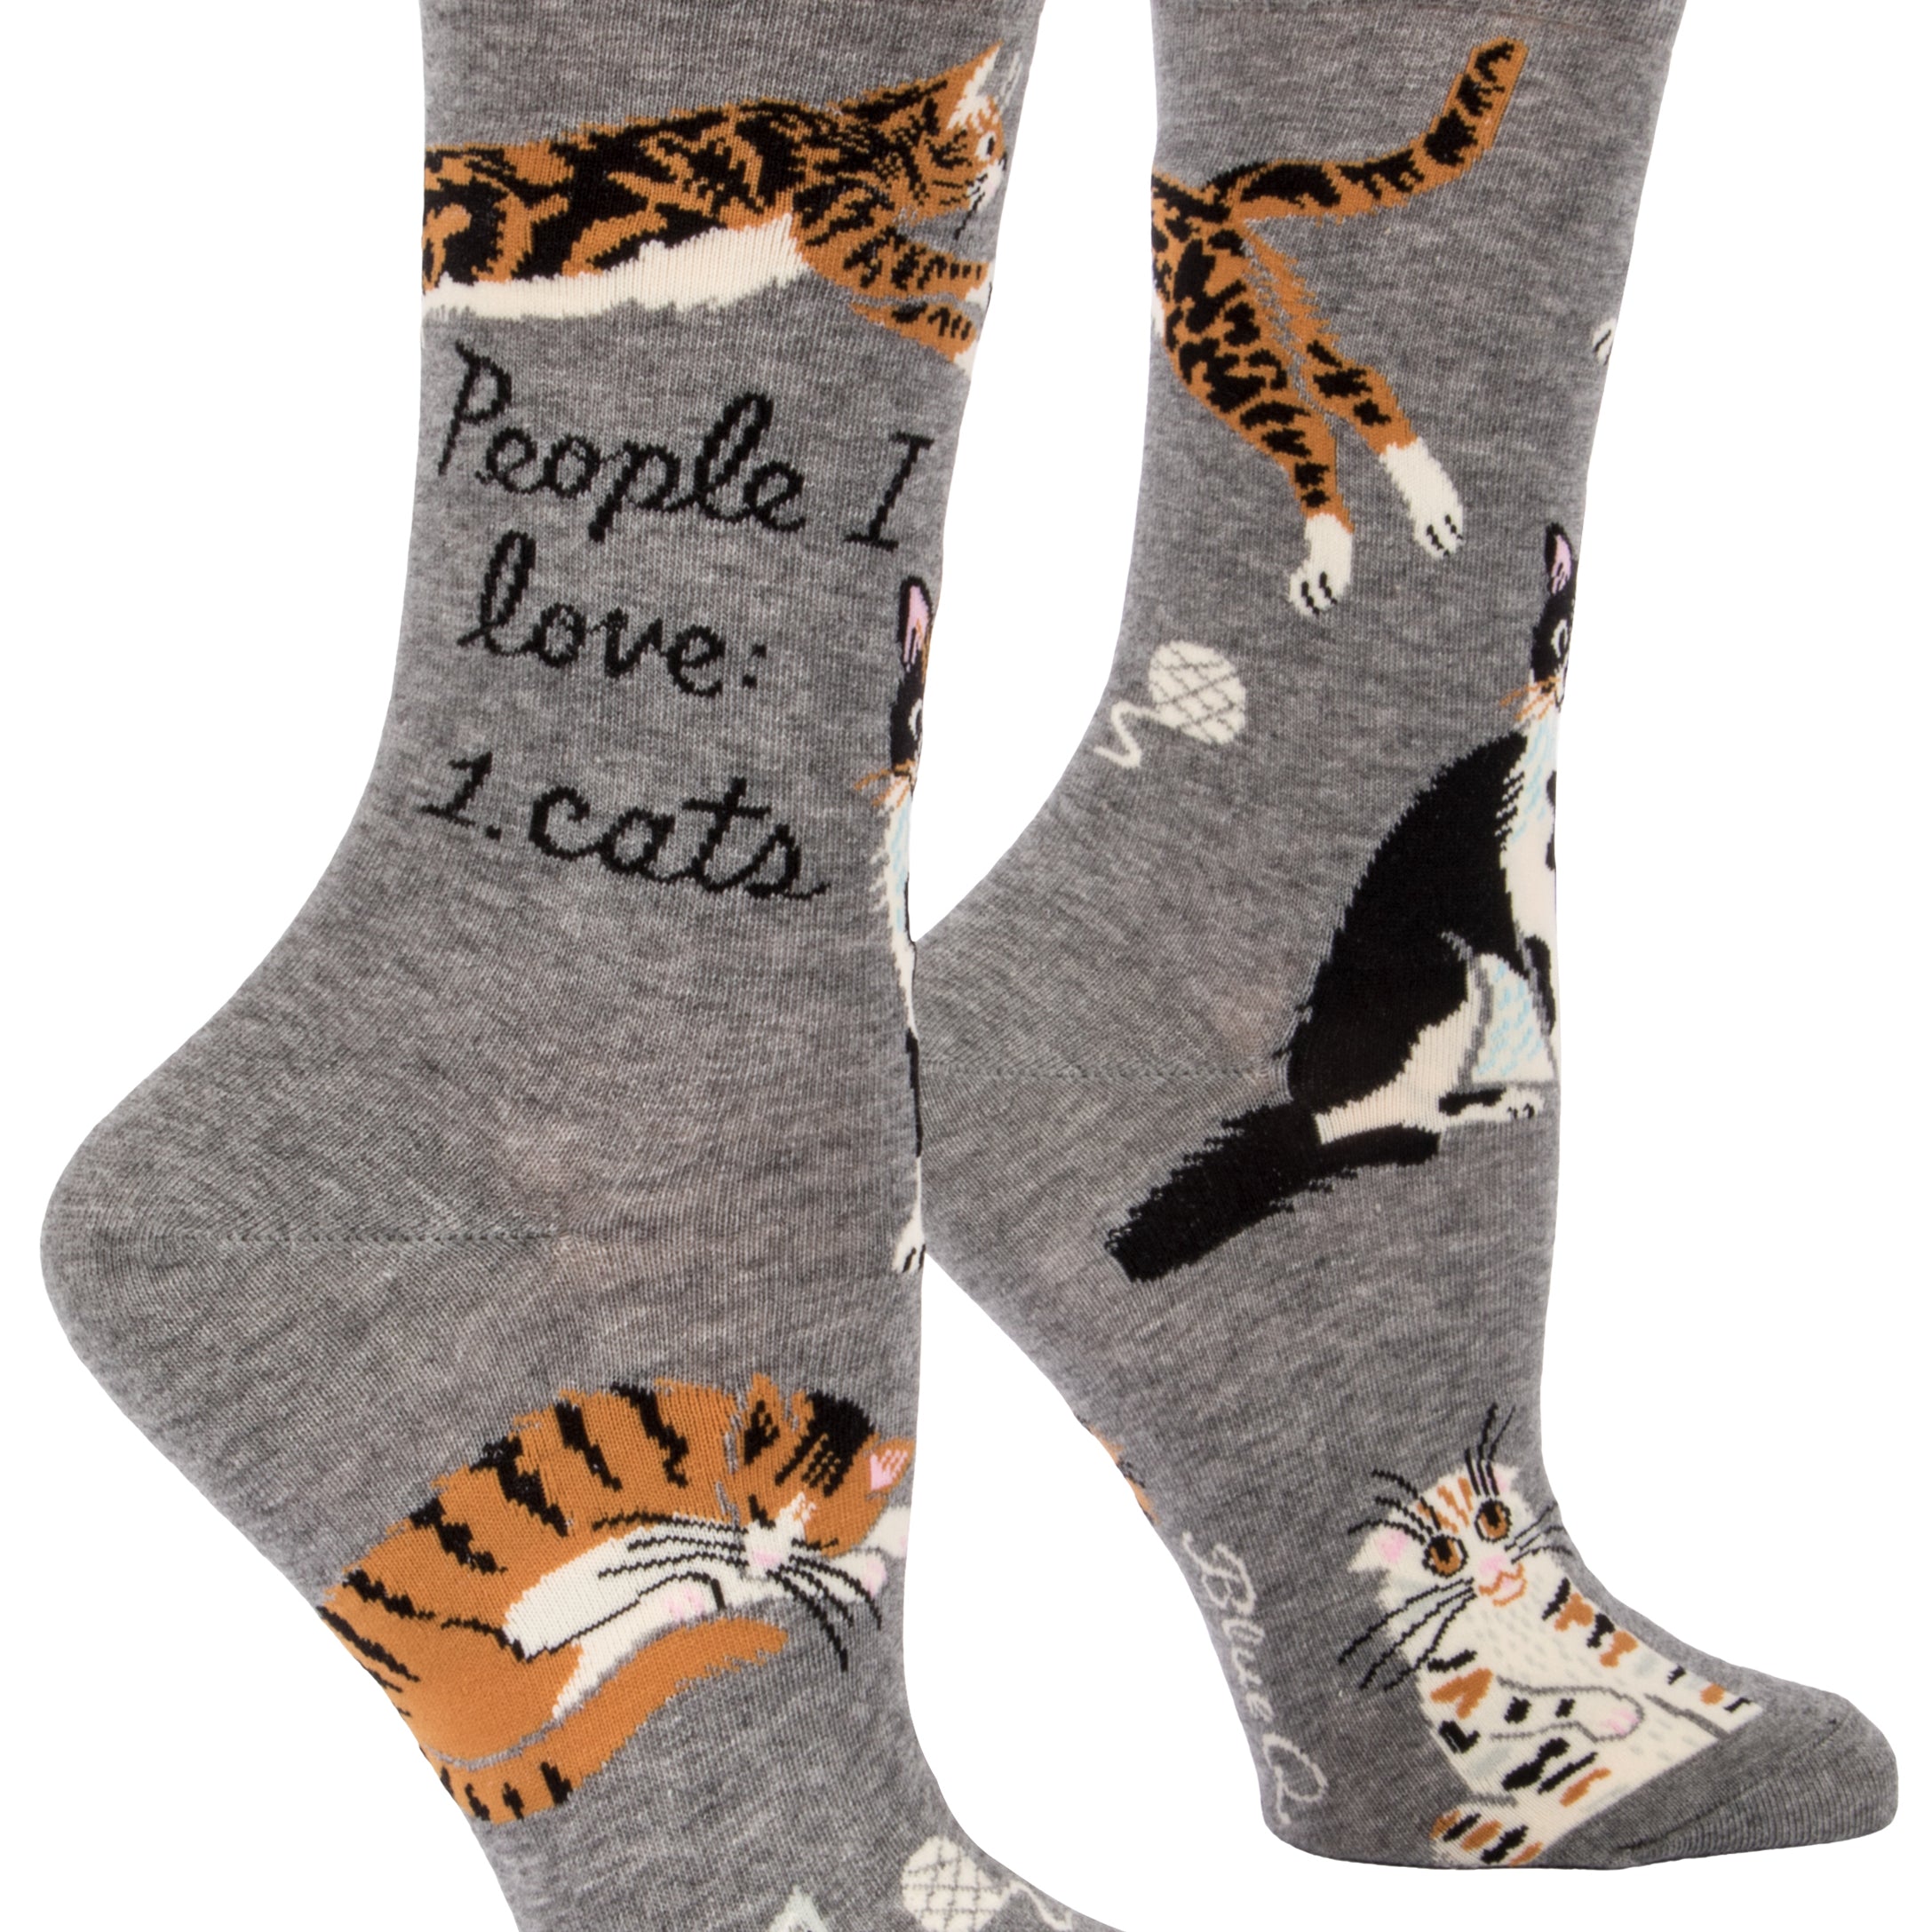 darker grey socks with a bunch of cats and balls of yarn on ankle it says people i love: 1.cats